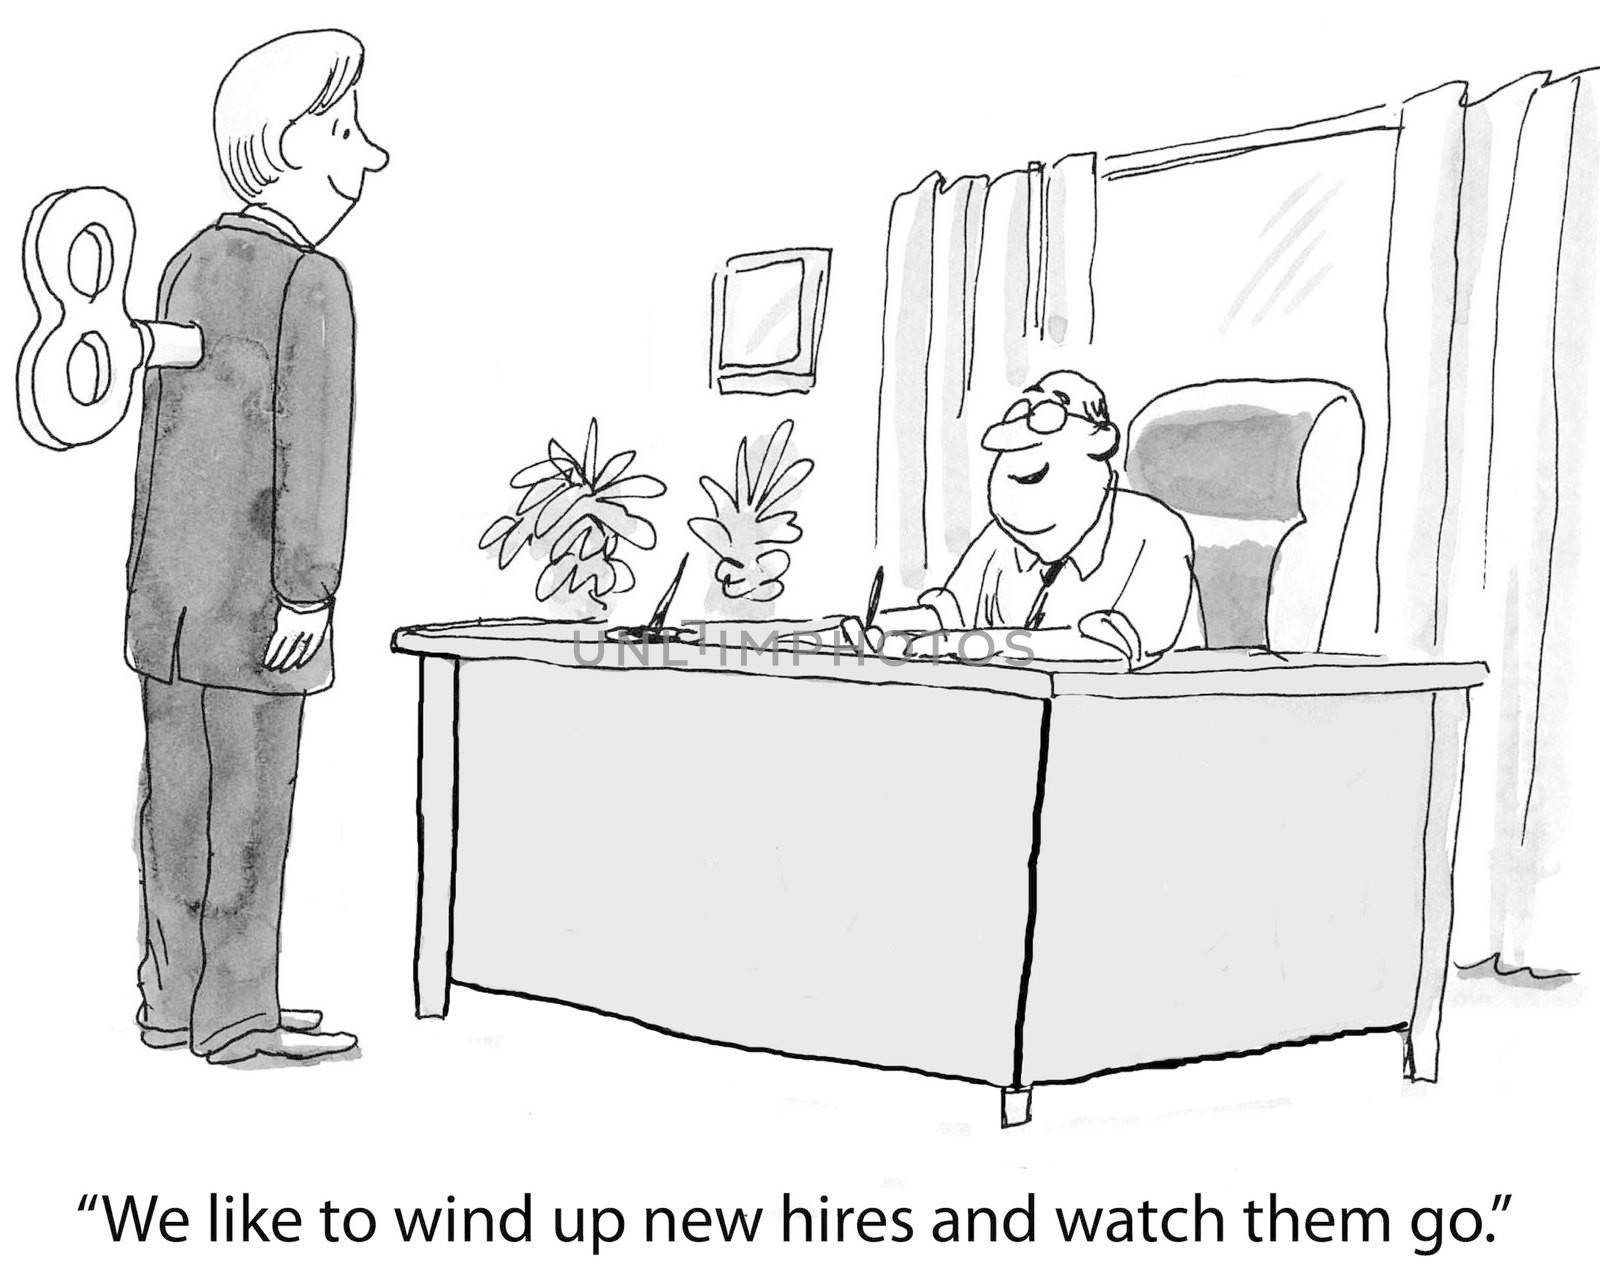 "We like to wind up new hires and watch them go."